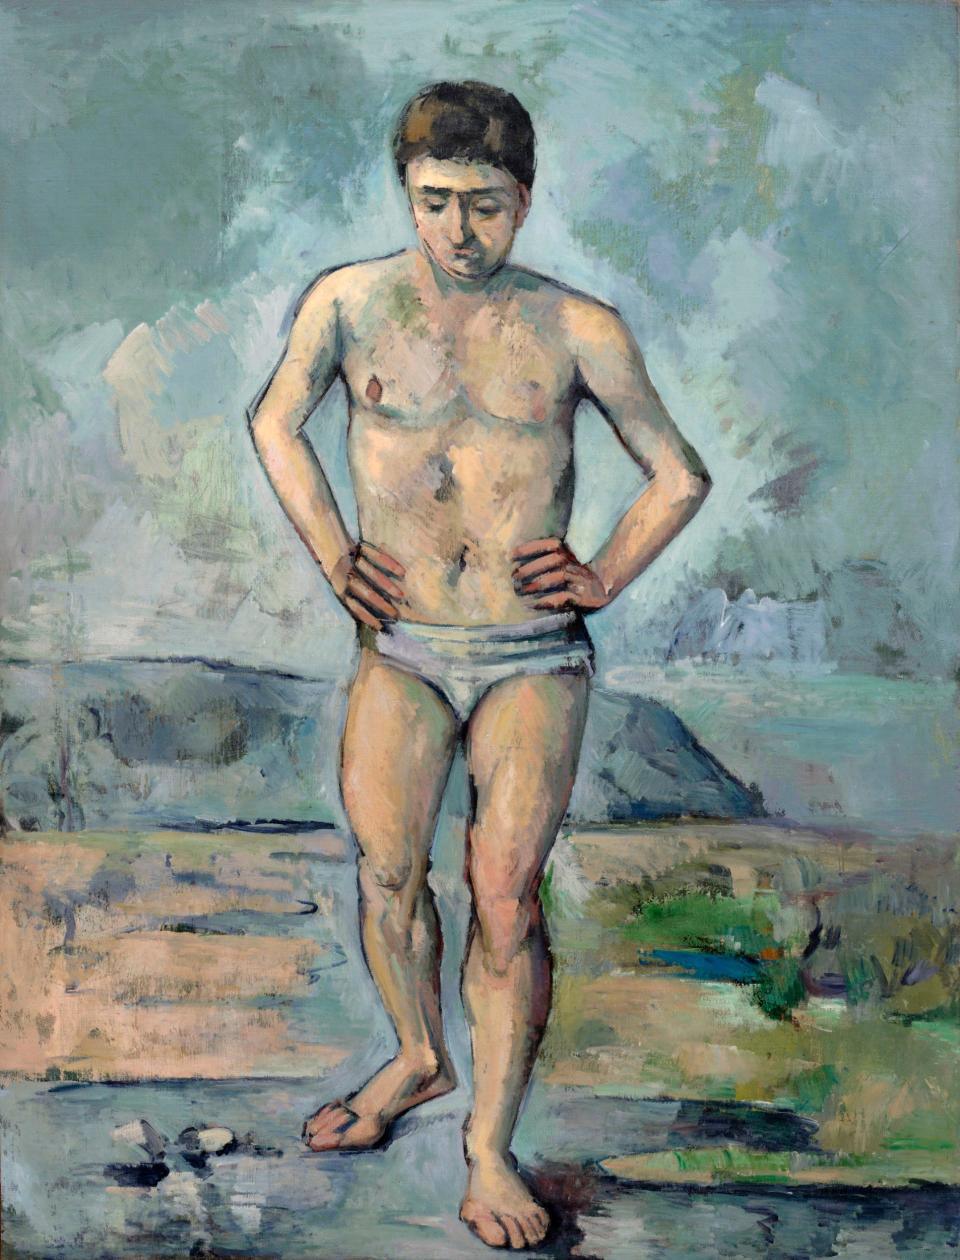 The clouds contain a self-portrait of the artist, Paul C&#xe9;zanne, in The Bather (c1885) - VCG Wilson/Corbis/Getty